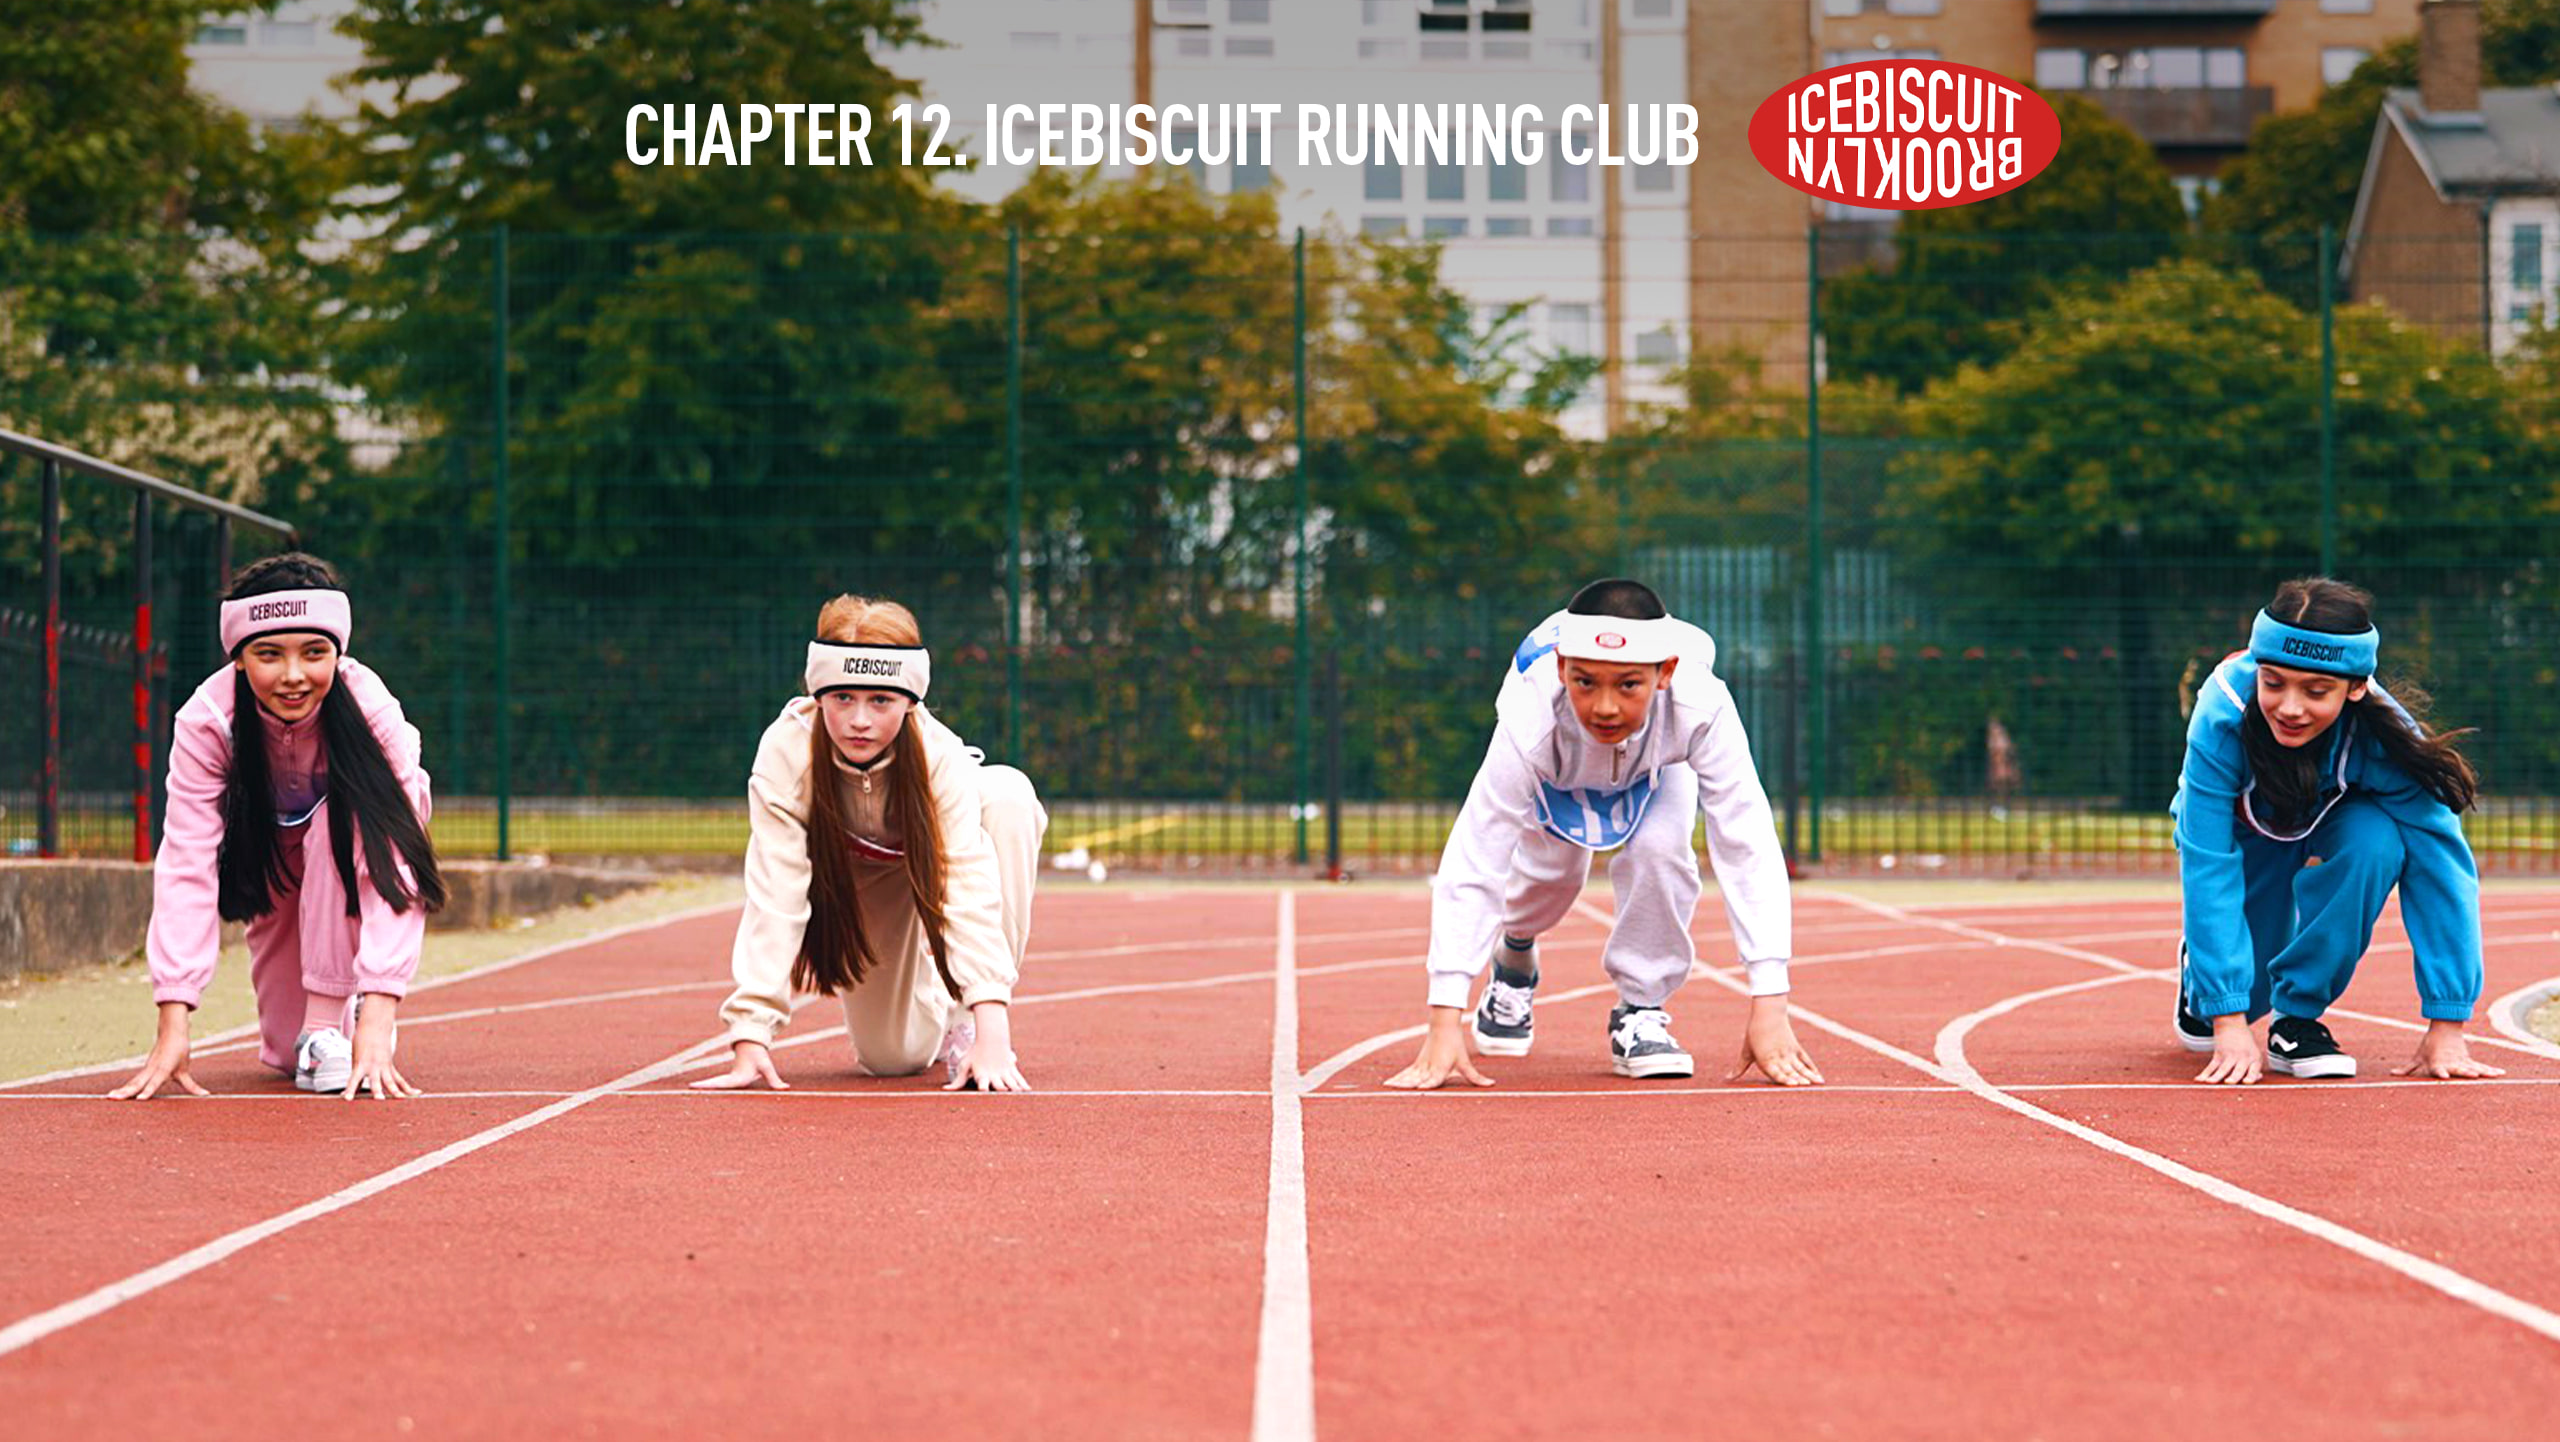 CHAPTER 12. ICEBISCUIT RUNNING CLUB